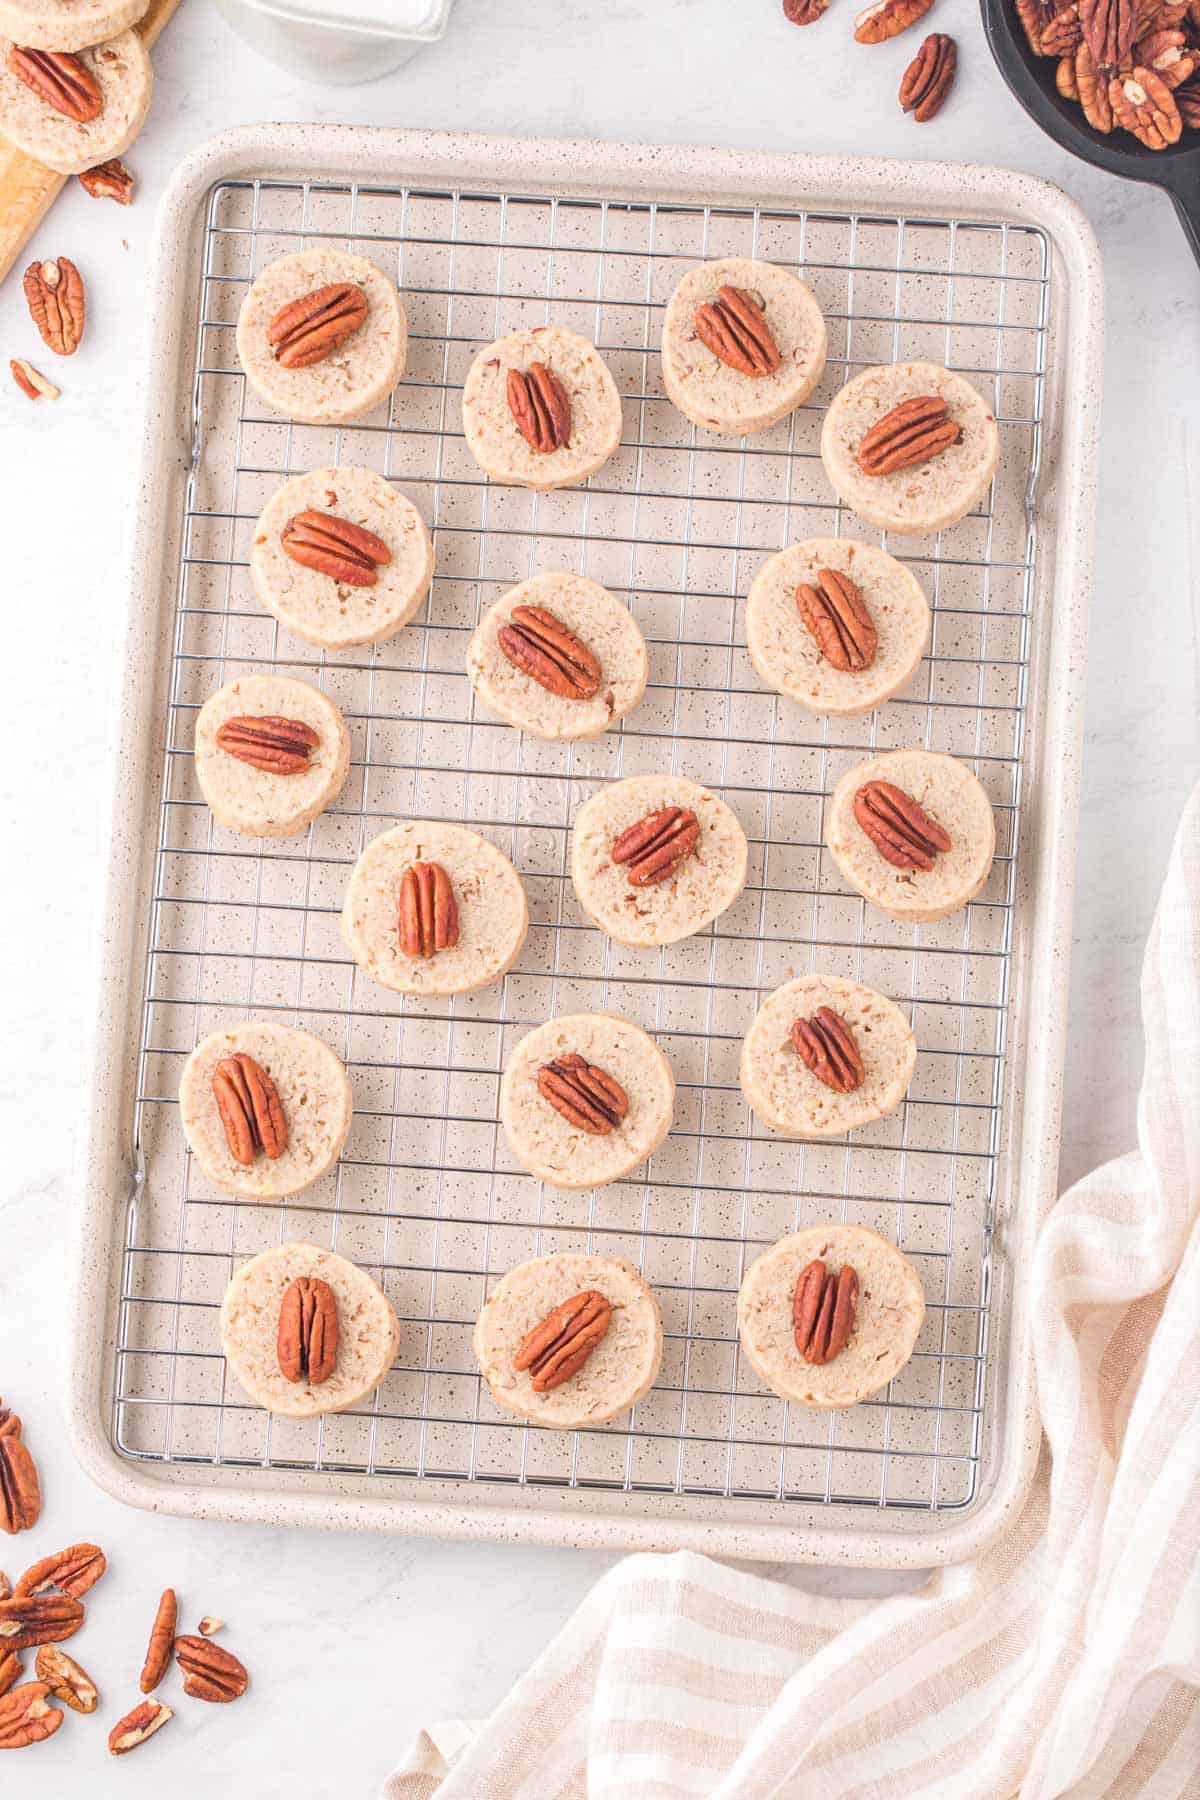 pecan sandies  lined in rows on a wire rack on top of a backing dish surrounded by a kitchen towel, more pecan pieces and more cookies